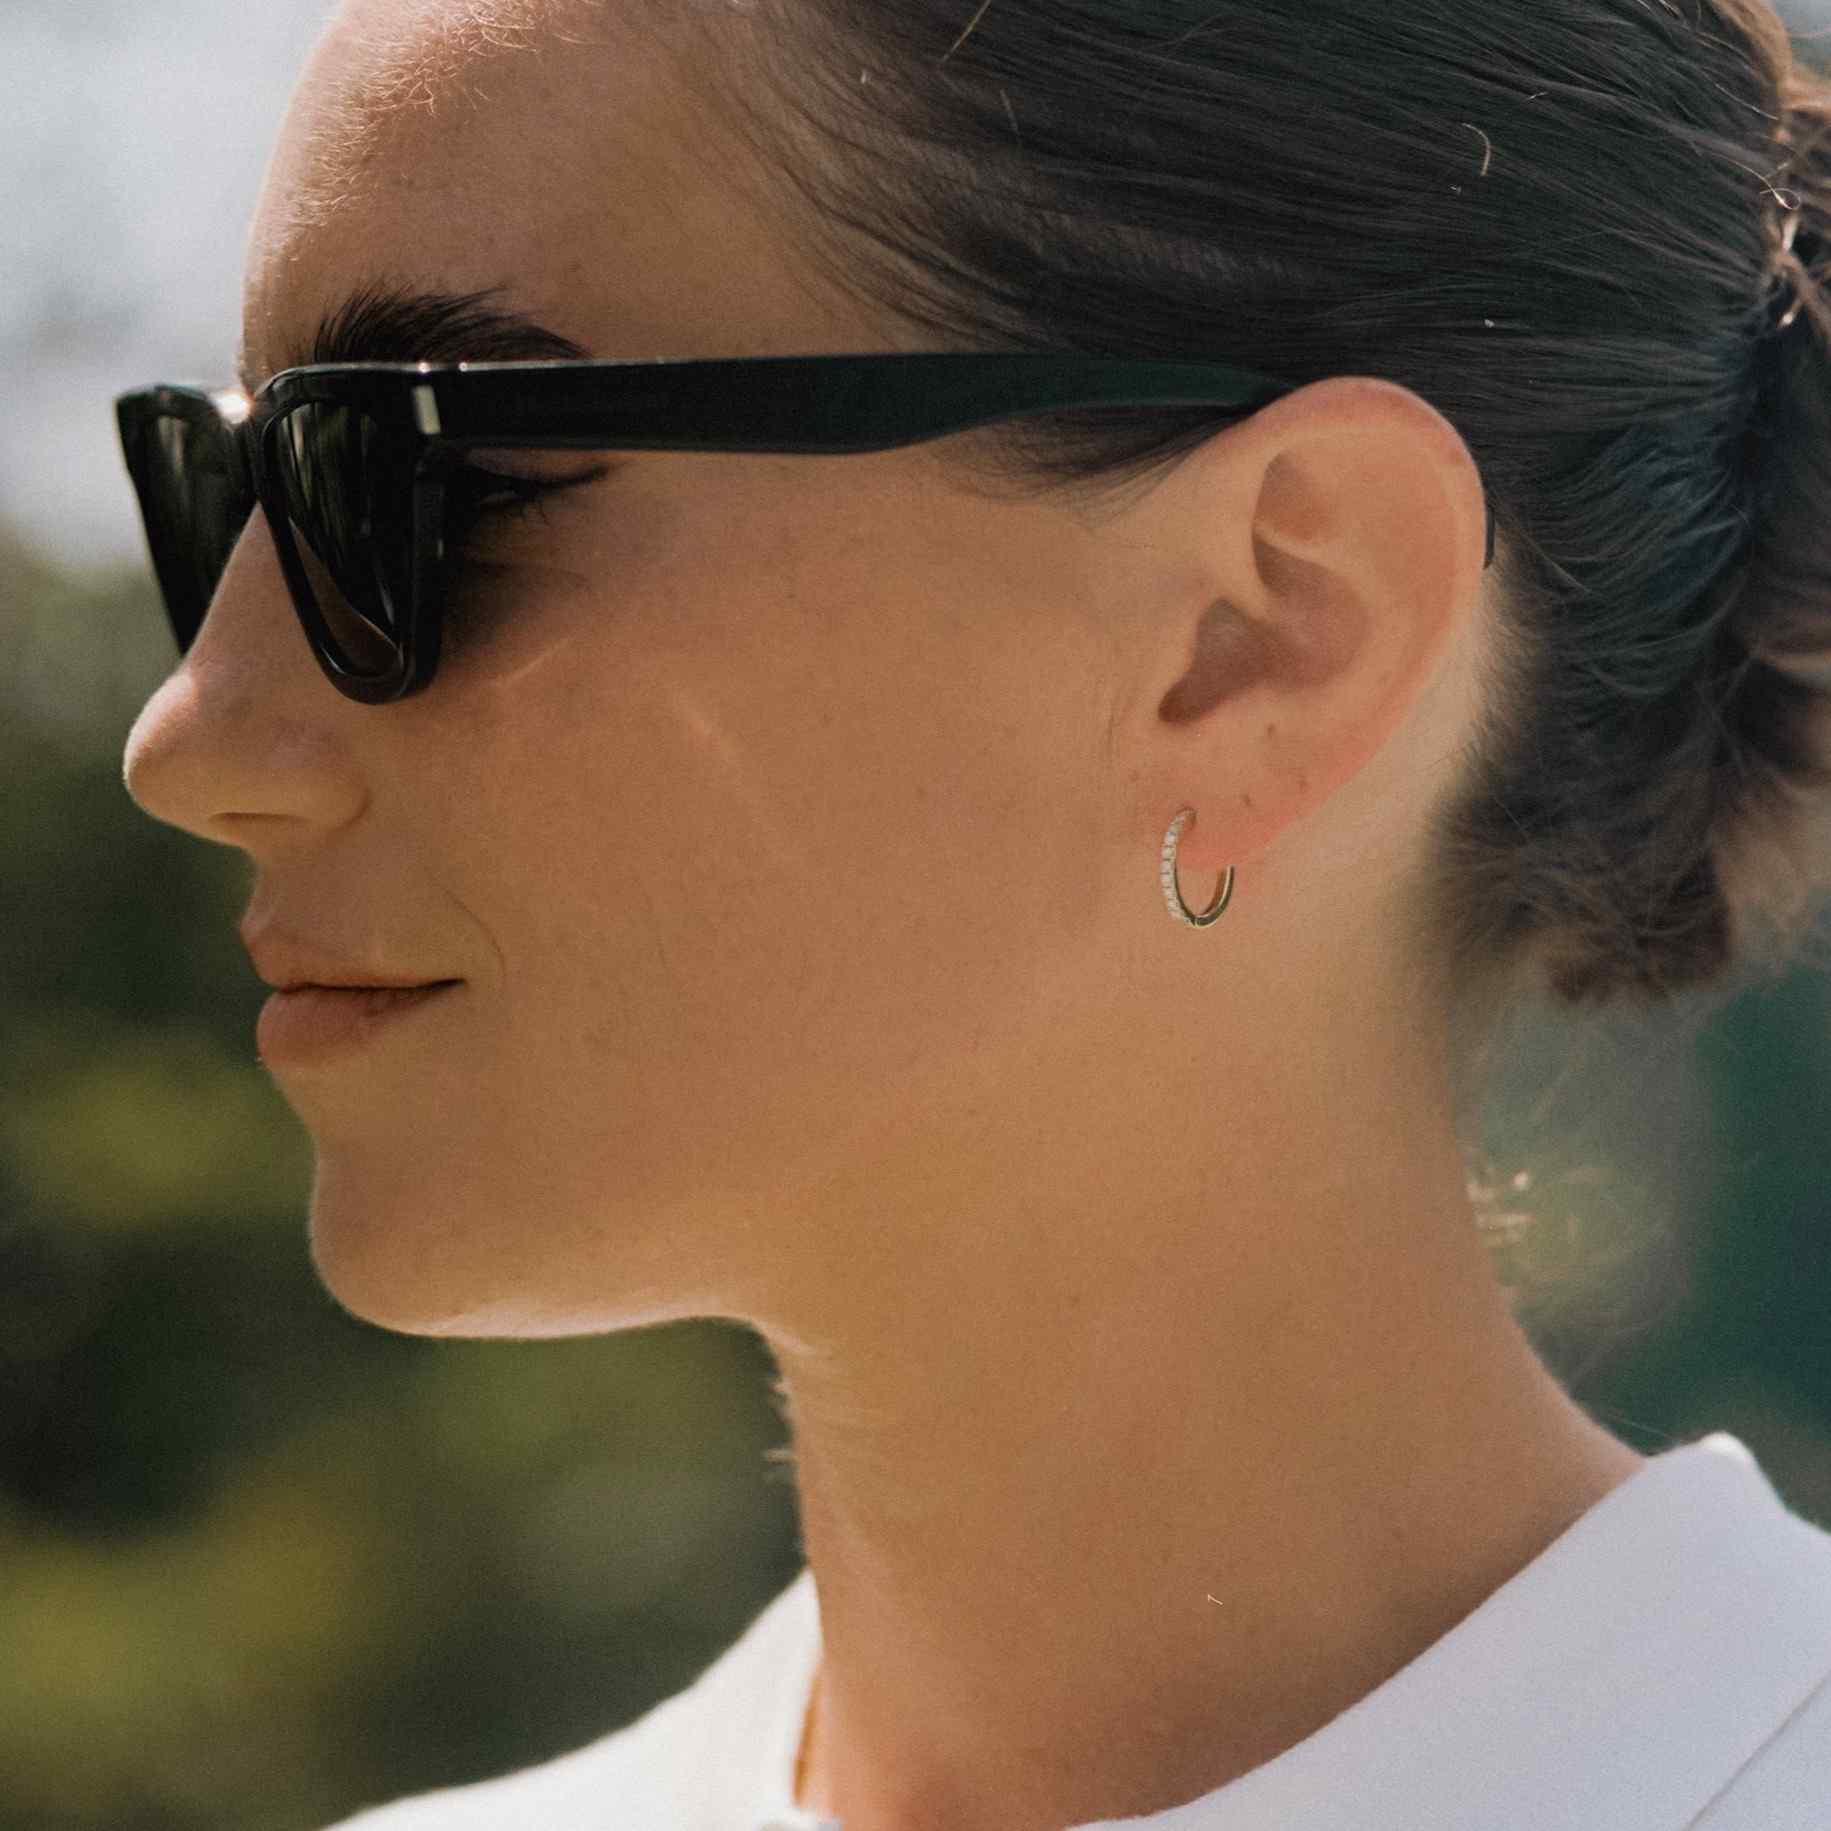 A model wears the Toujours earrings - a classic 12mm diamond hoop featuring 22 D color, IF/VVS clarity round brilliants in 18k gold. Sold as a pair.